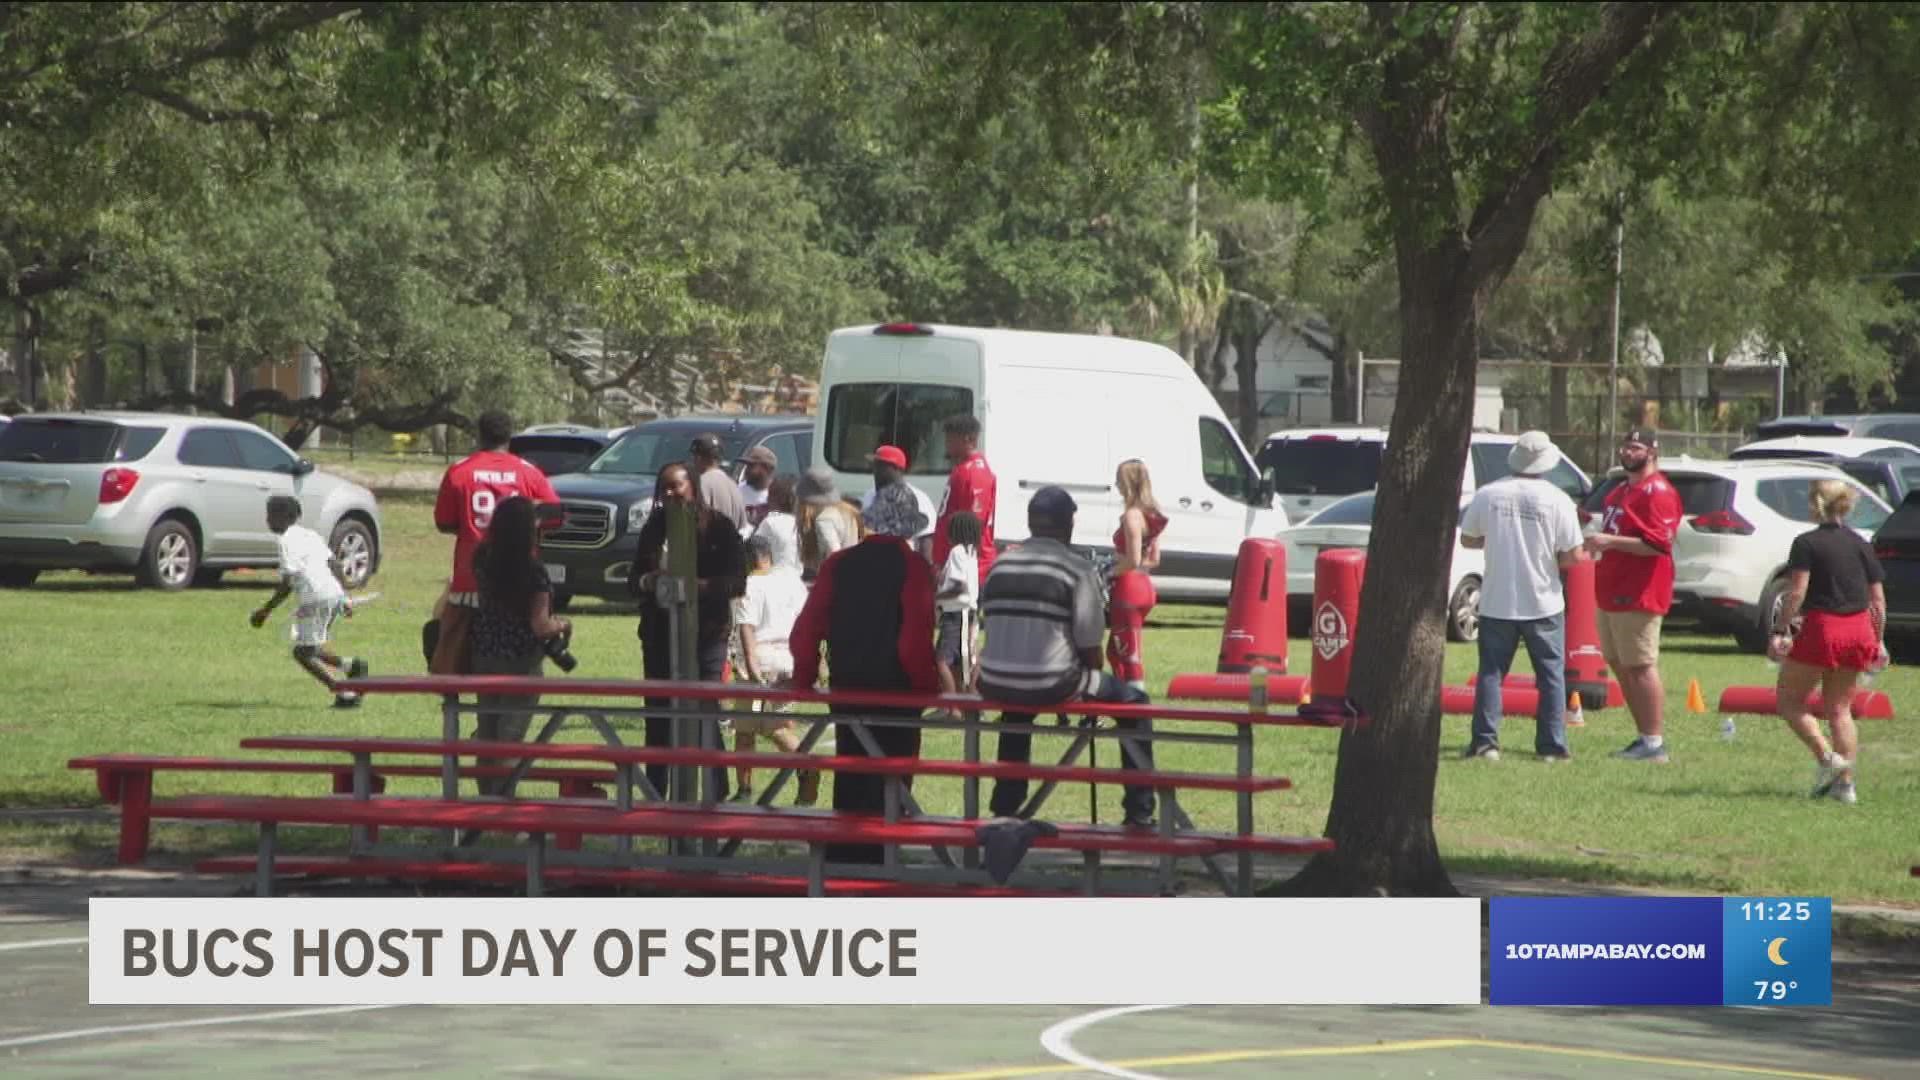 The Tampa Bay Buccaneers and technology company Jabil partnered for their fifth annual Day of Service.